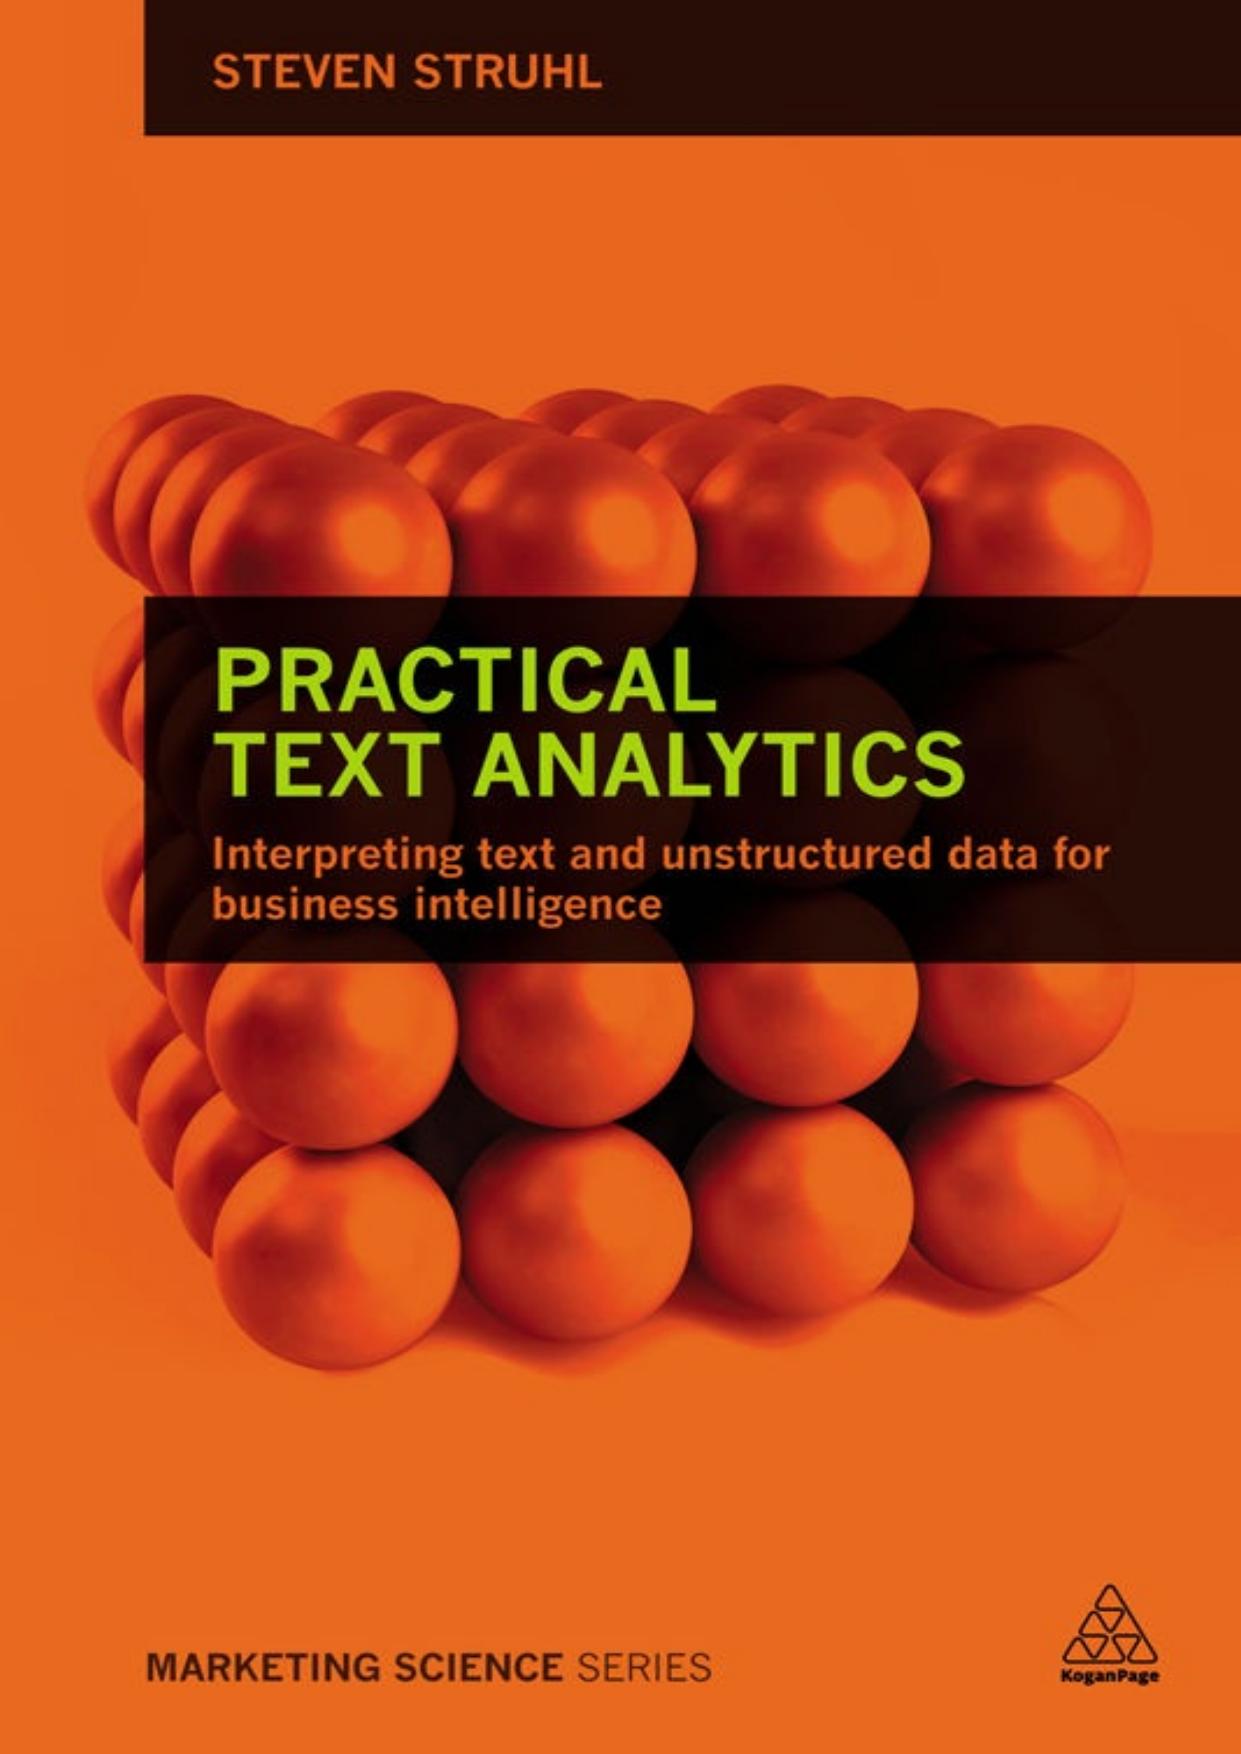 Practical Text Analytics: Interpreting Text and Unstructured Data for Business Intelligence (Marketing Science) by Steven Struhl